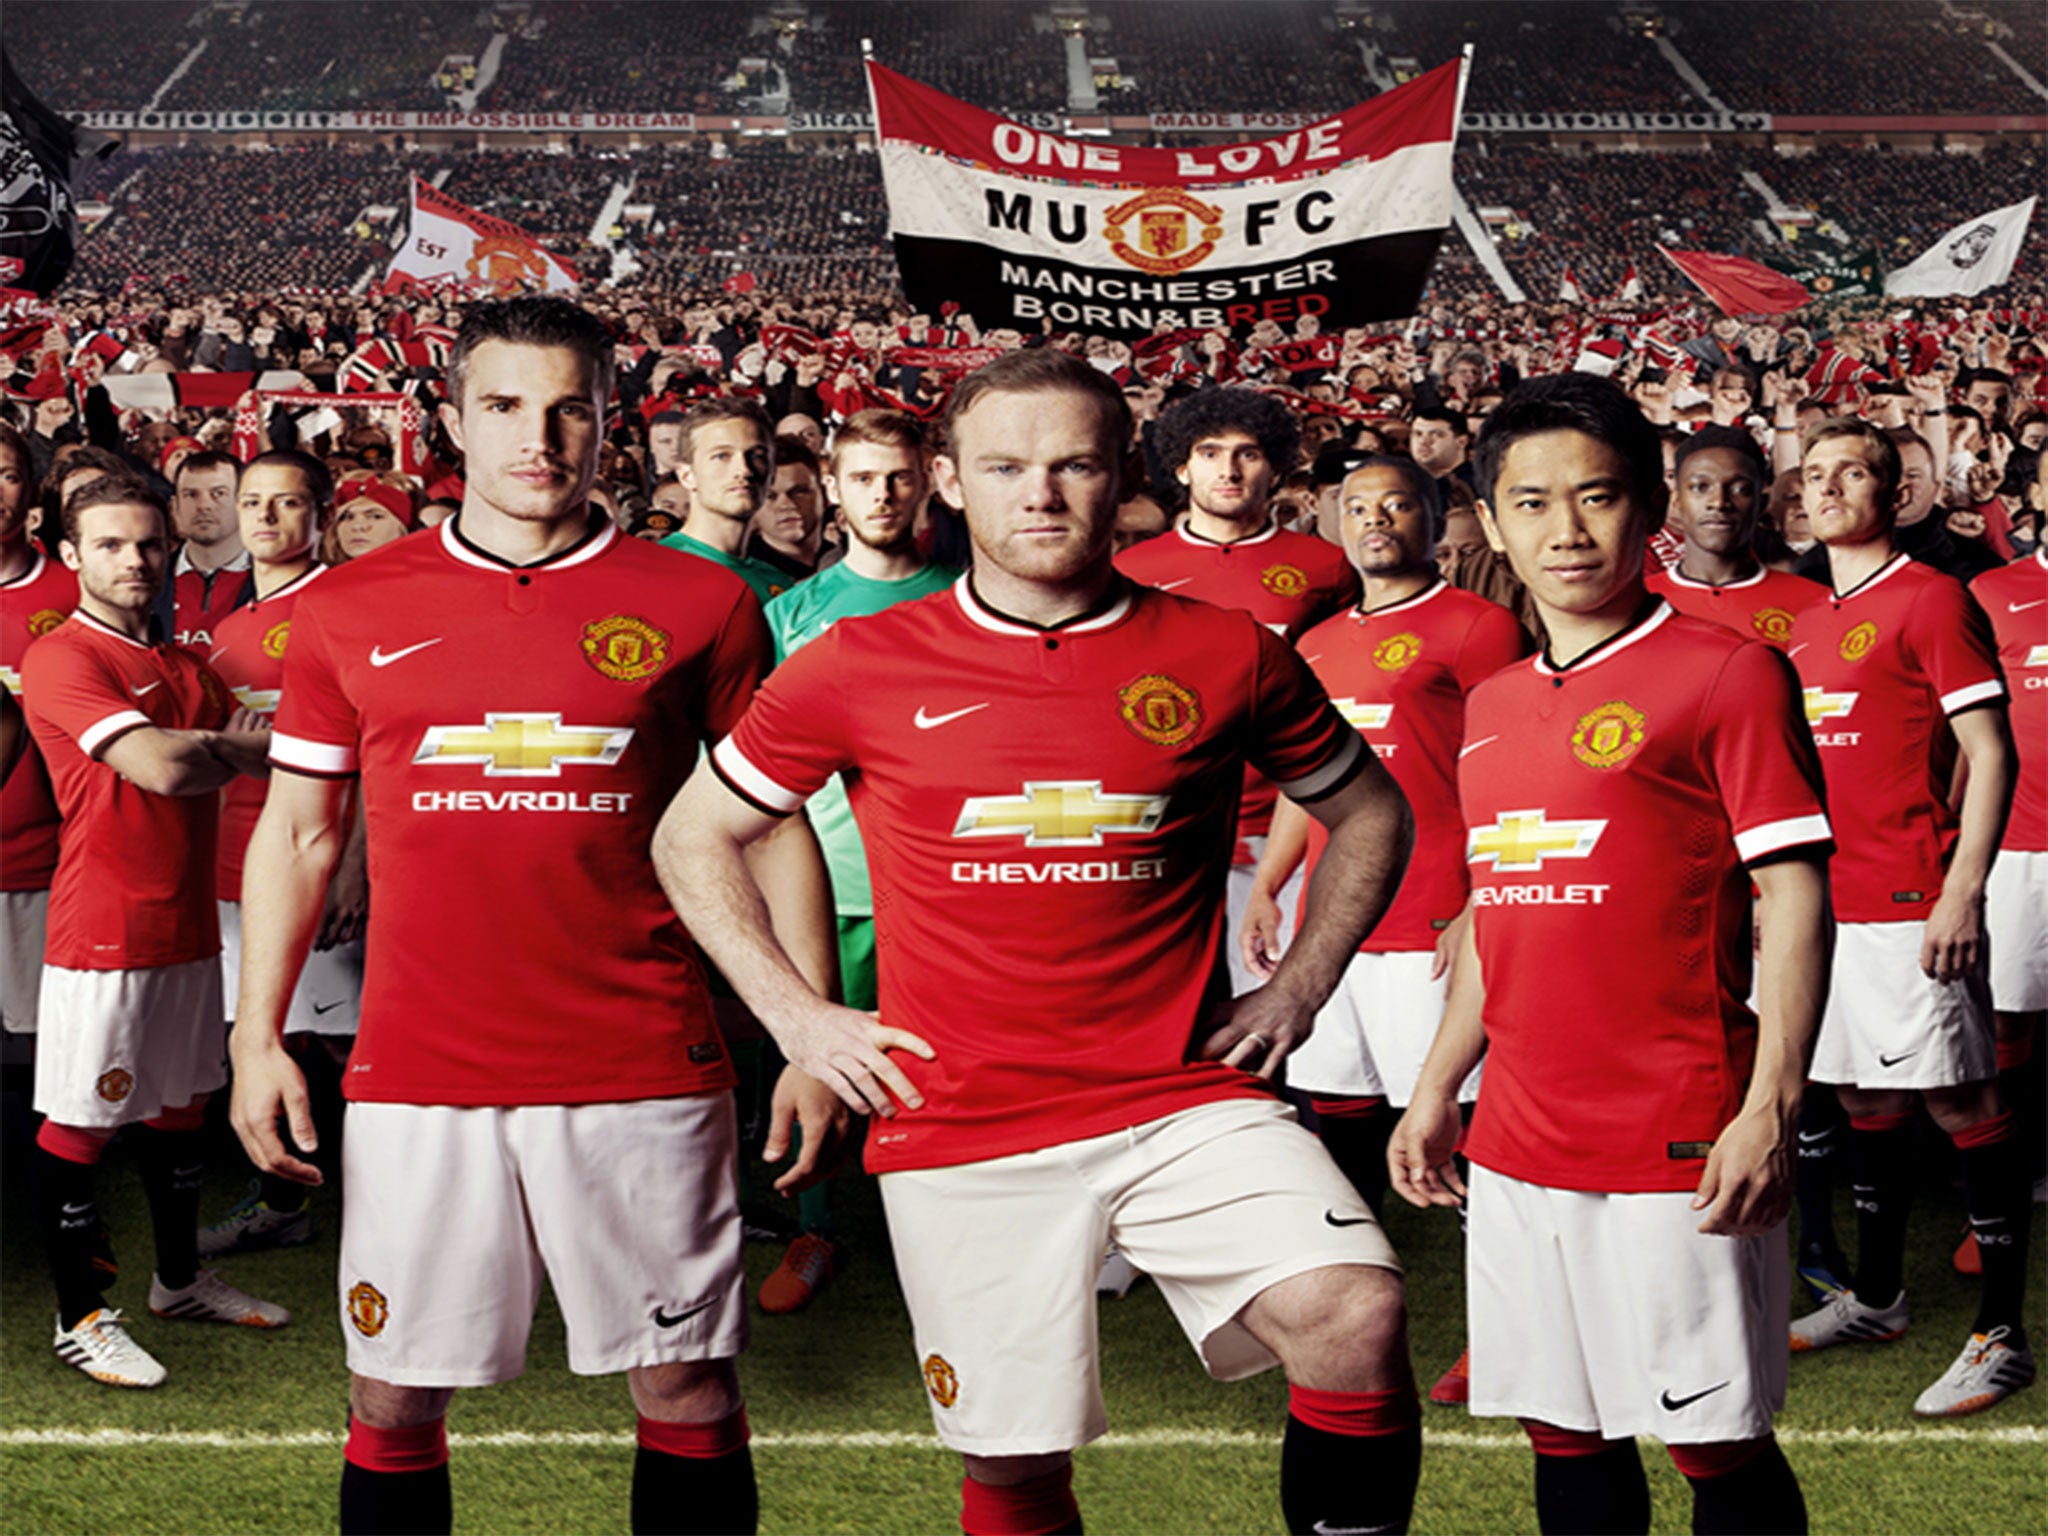 Manchester United have unveiled their new kit for the 2014/15 season